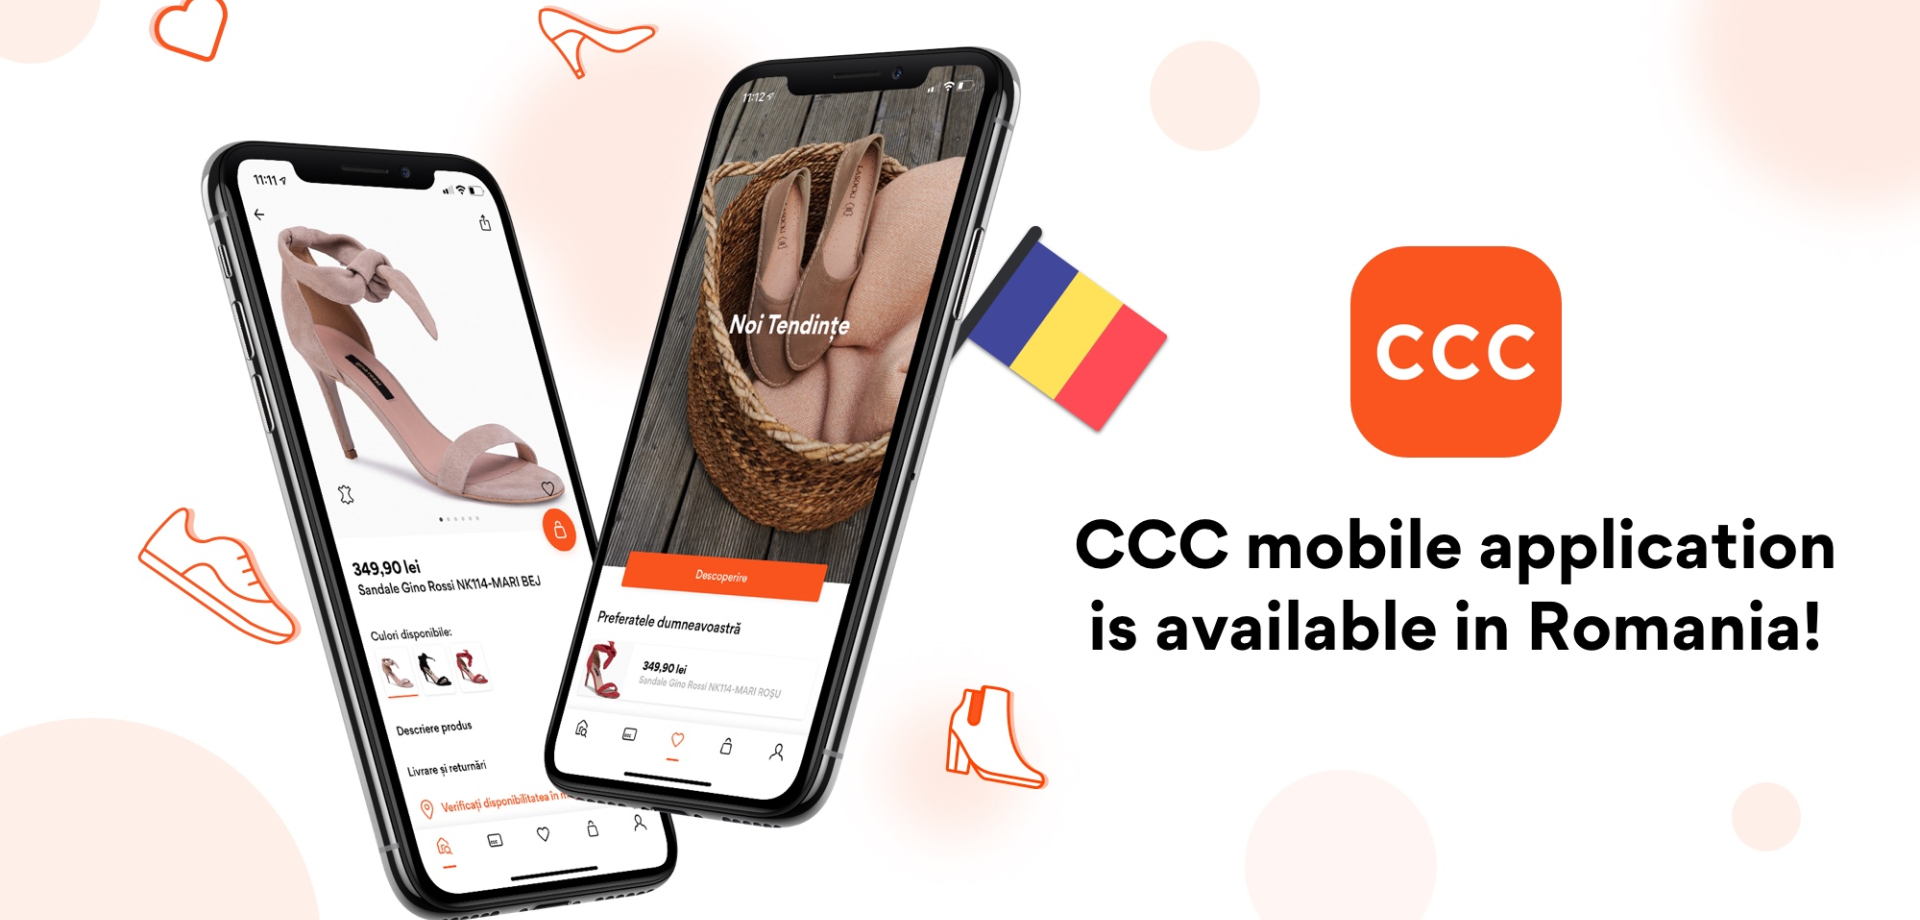 Start of the CCC mobile application in Romania